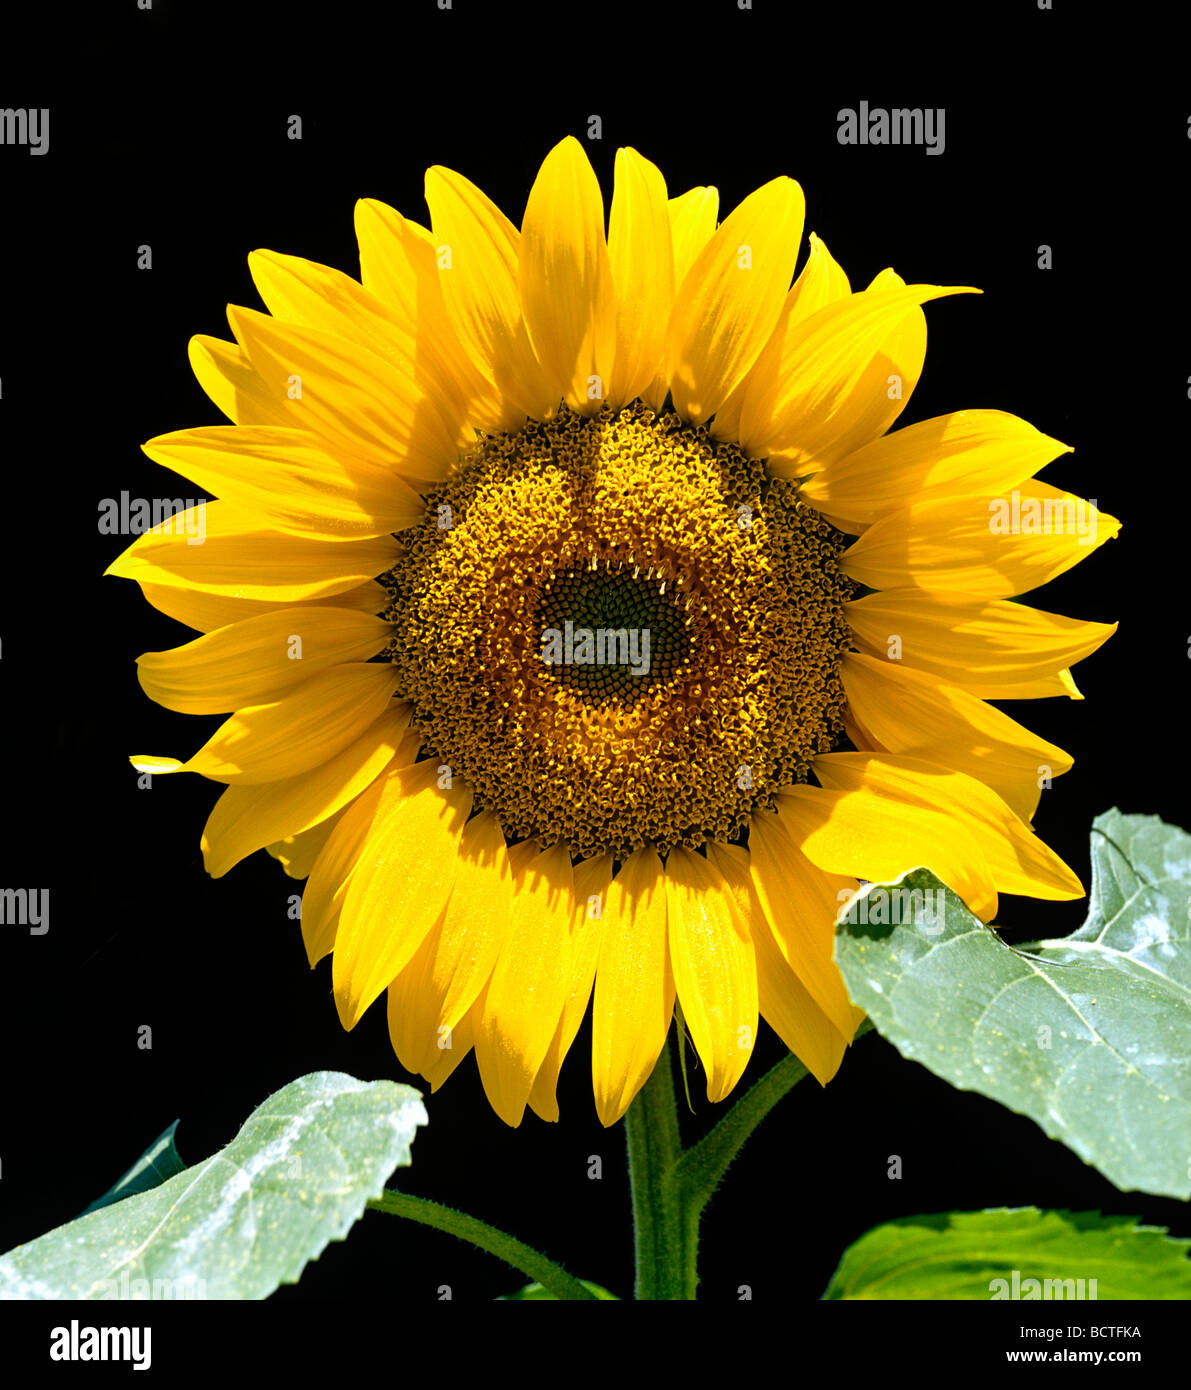 Blossom of a sunflowers (Helianthus annuus), Germany, Europe Stock Photo